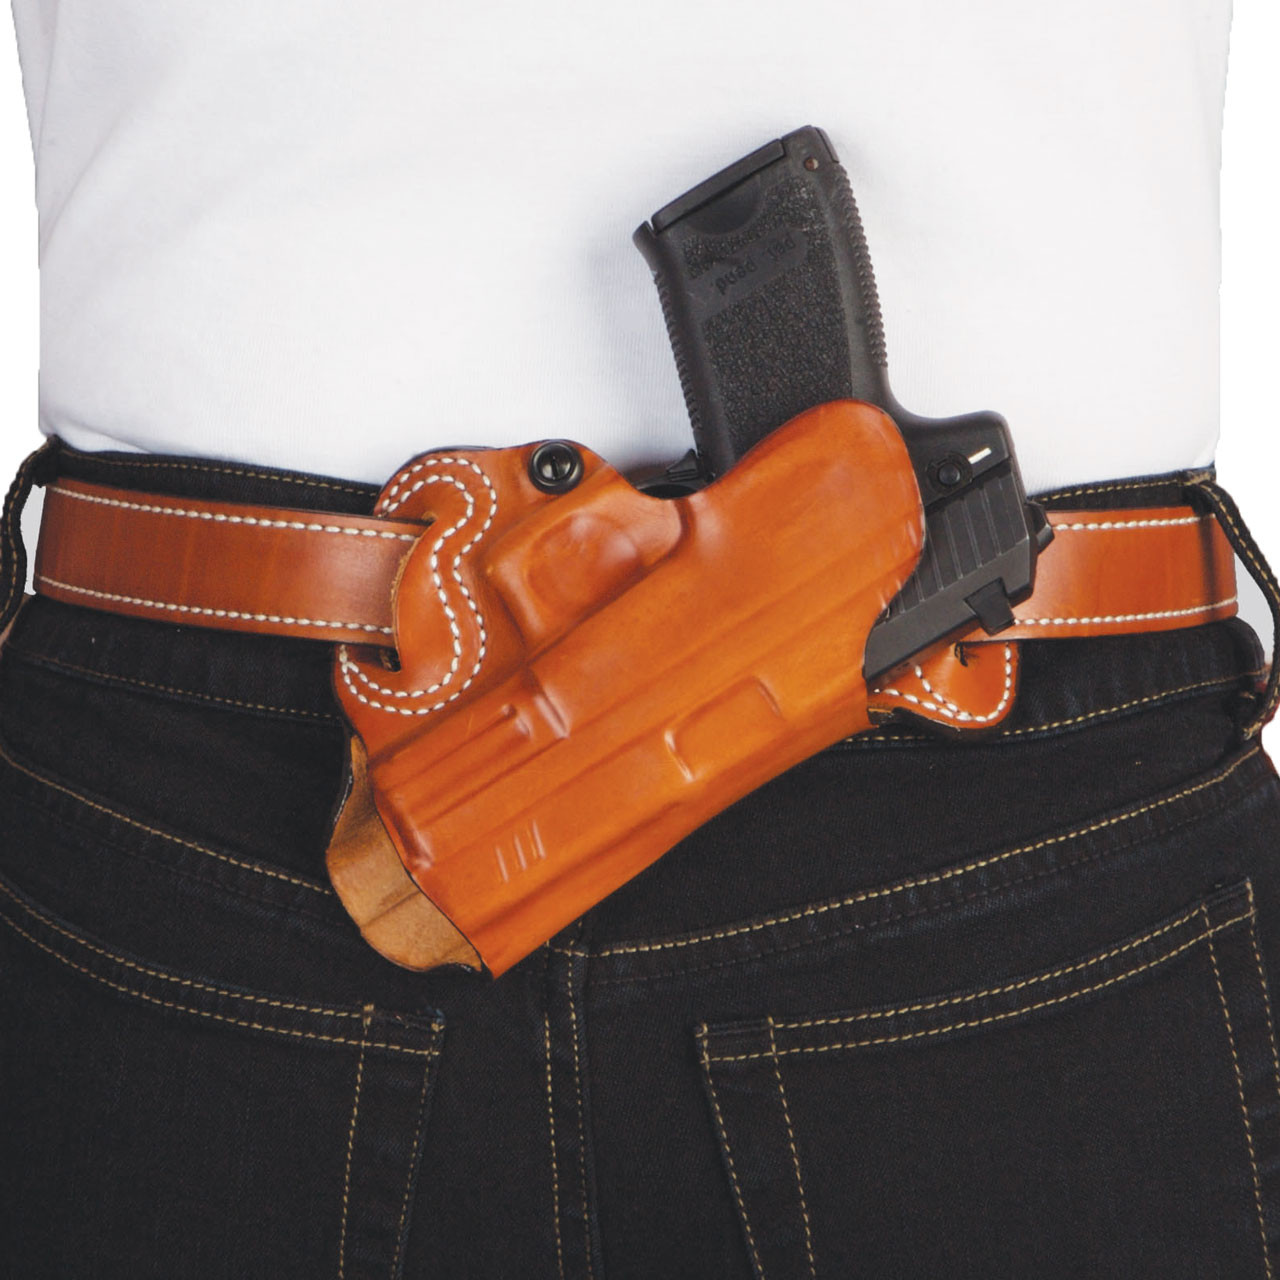 Small of Back (S.O.B.) Holster - Black or Tan